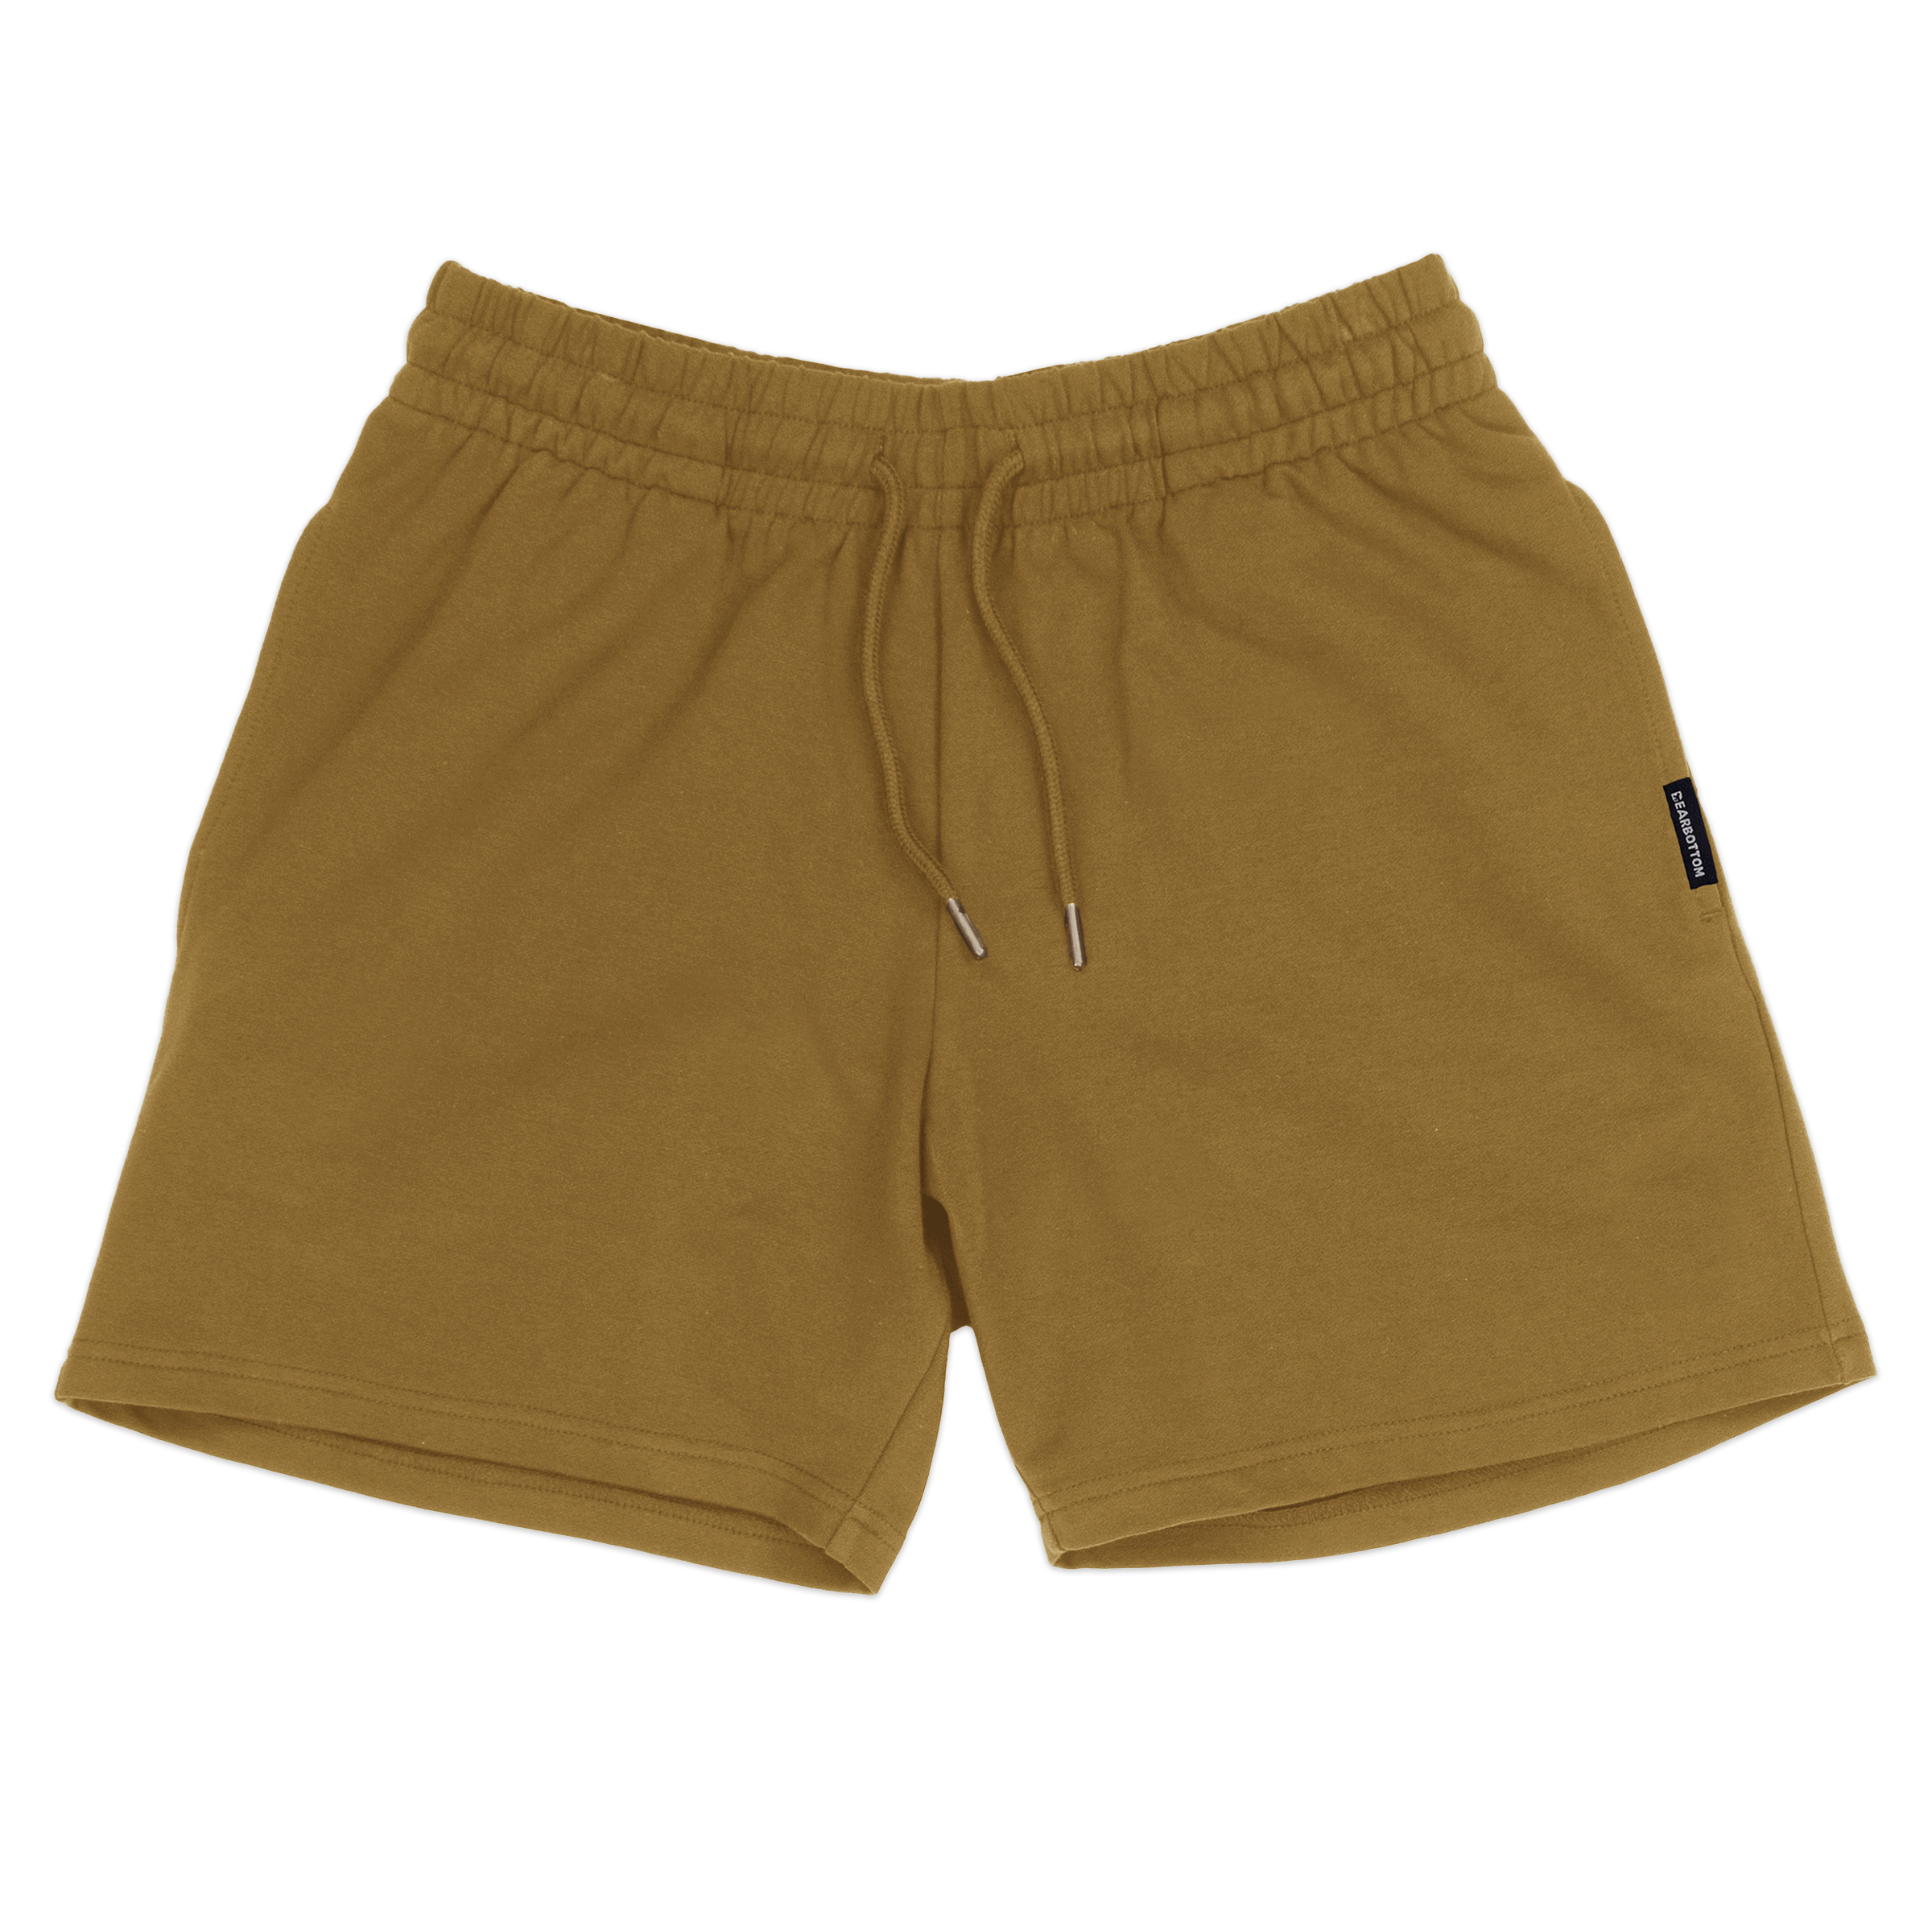 Loft Short 5.5" Camel front with elastic waistband, fabric drawstring with metal tips, and two inseam pockets